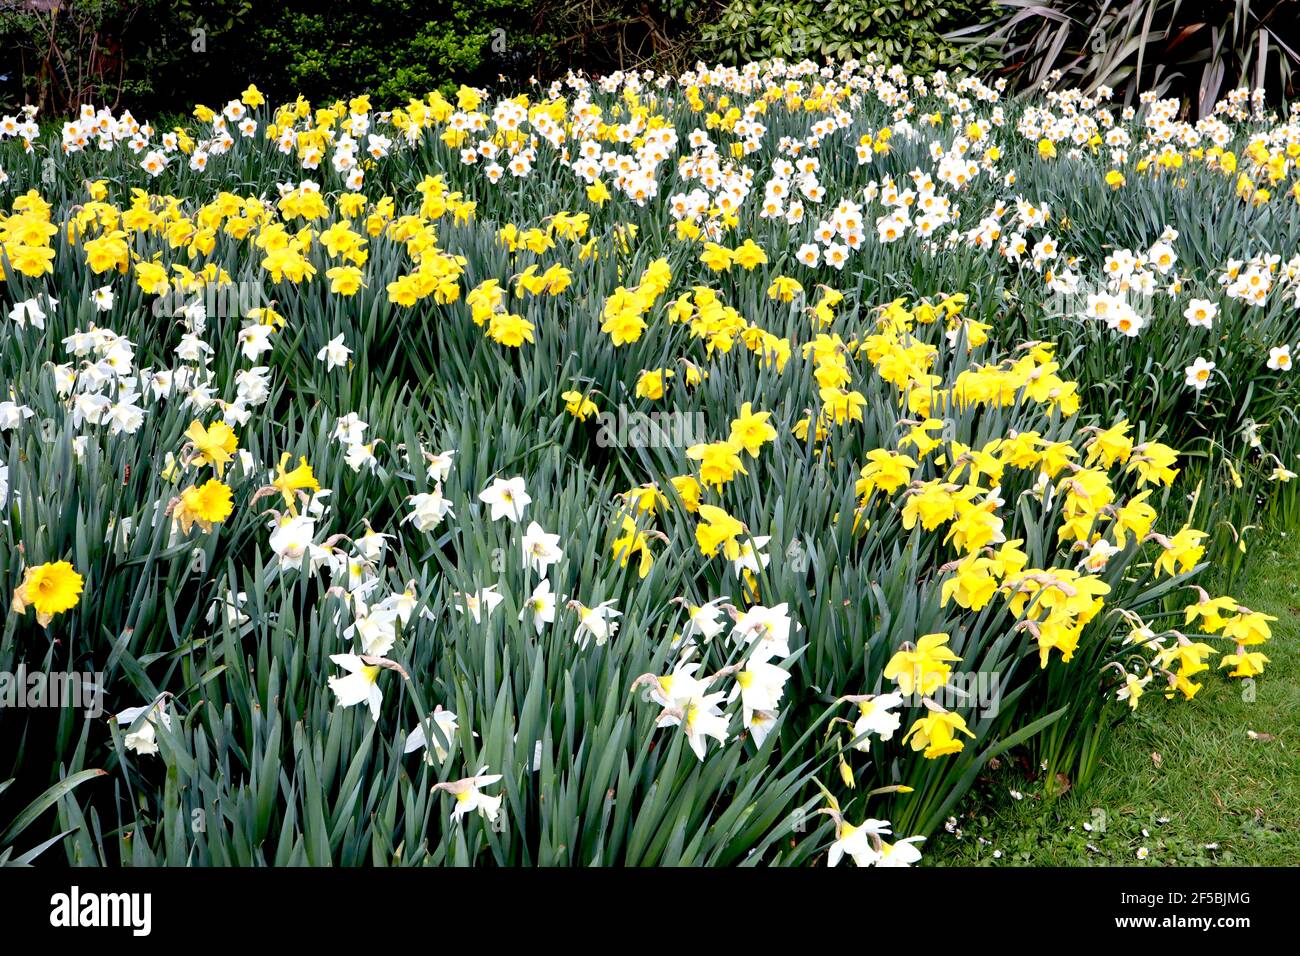 Narcissus / Daffodil 'Barrett Browning' Narcissus / Daffodil 'Dutch Master' Narcissus / Daffodil 'Mount Hood' March, Angleterre, Royaume-Uni Banque D'Images